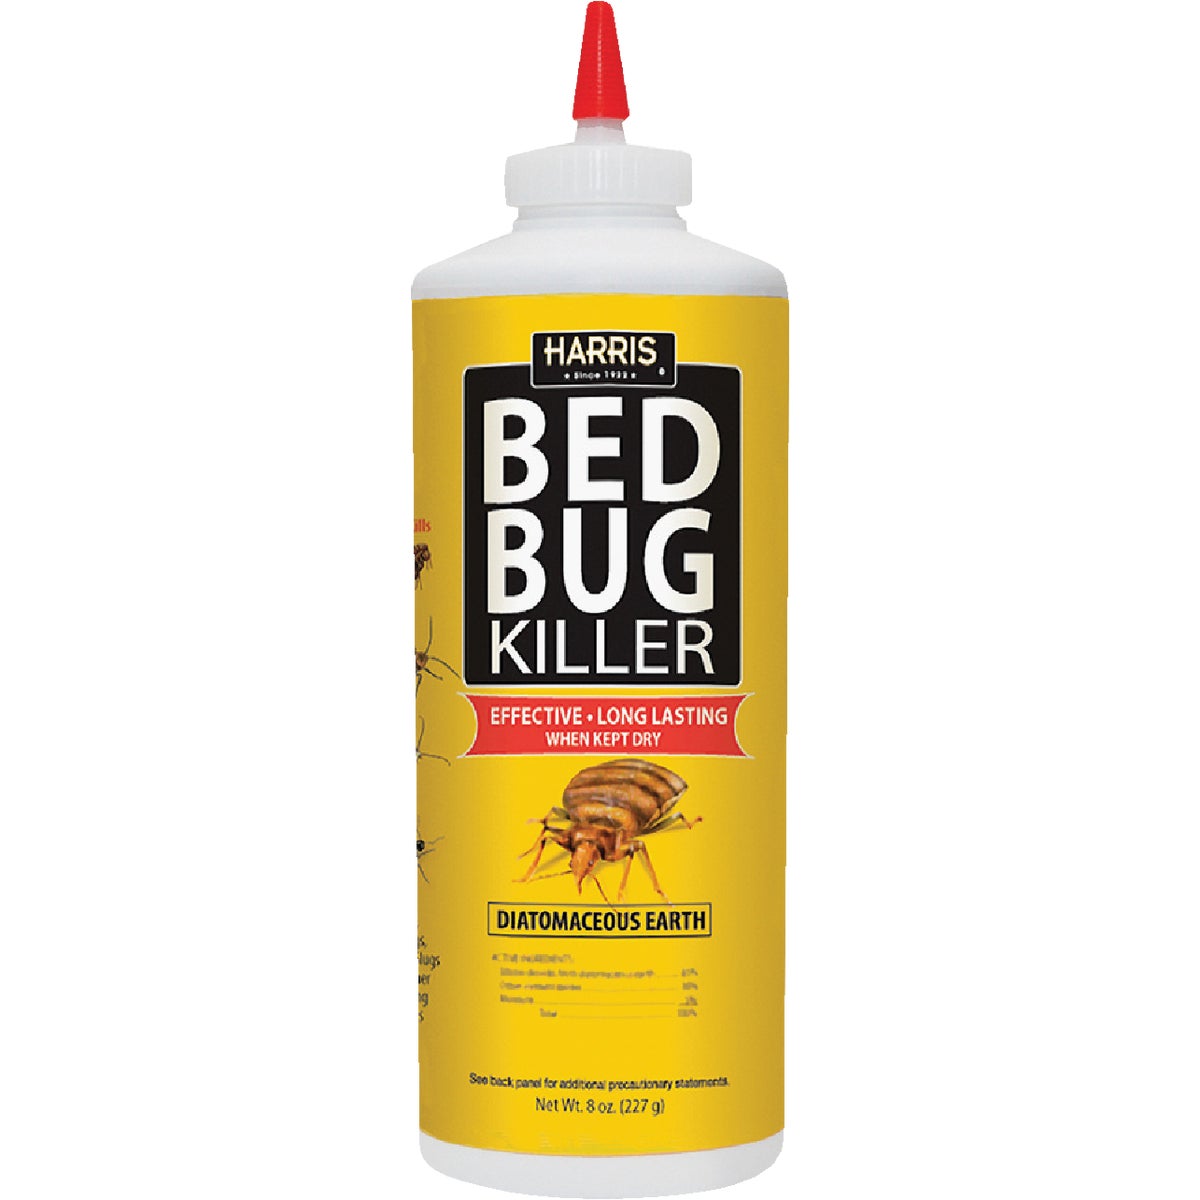 Item 709415, Diatomaceous earth powder kills bedbugs where they hide in cracks and 